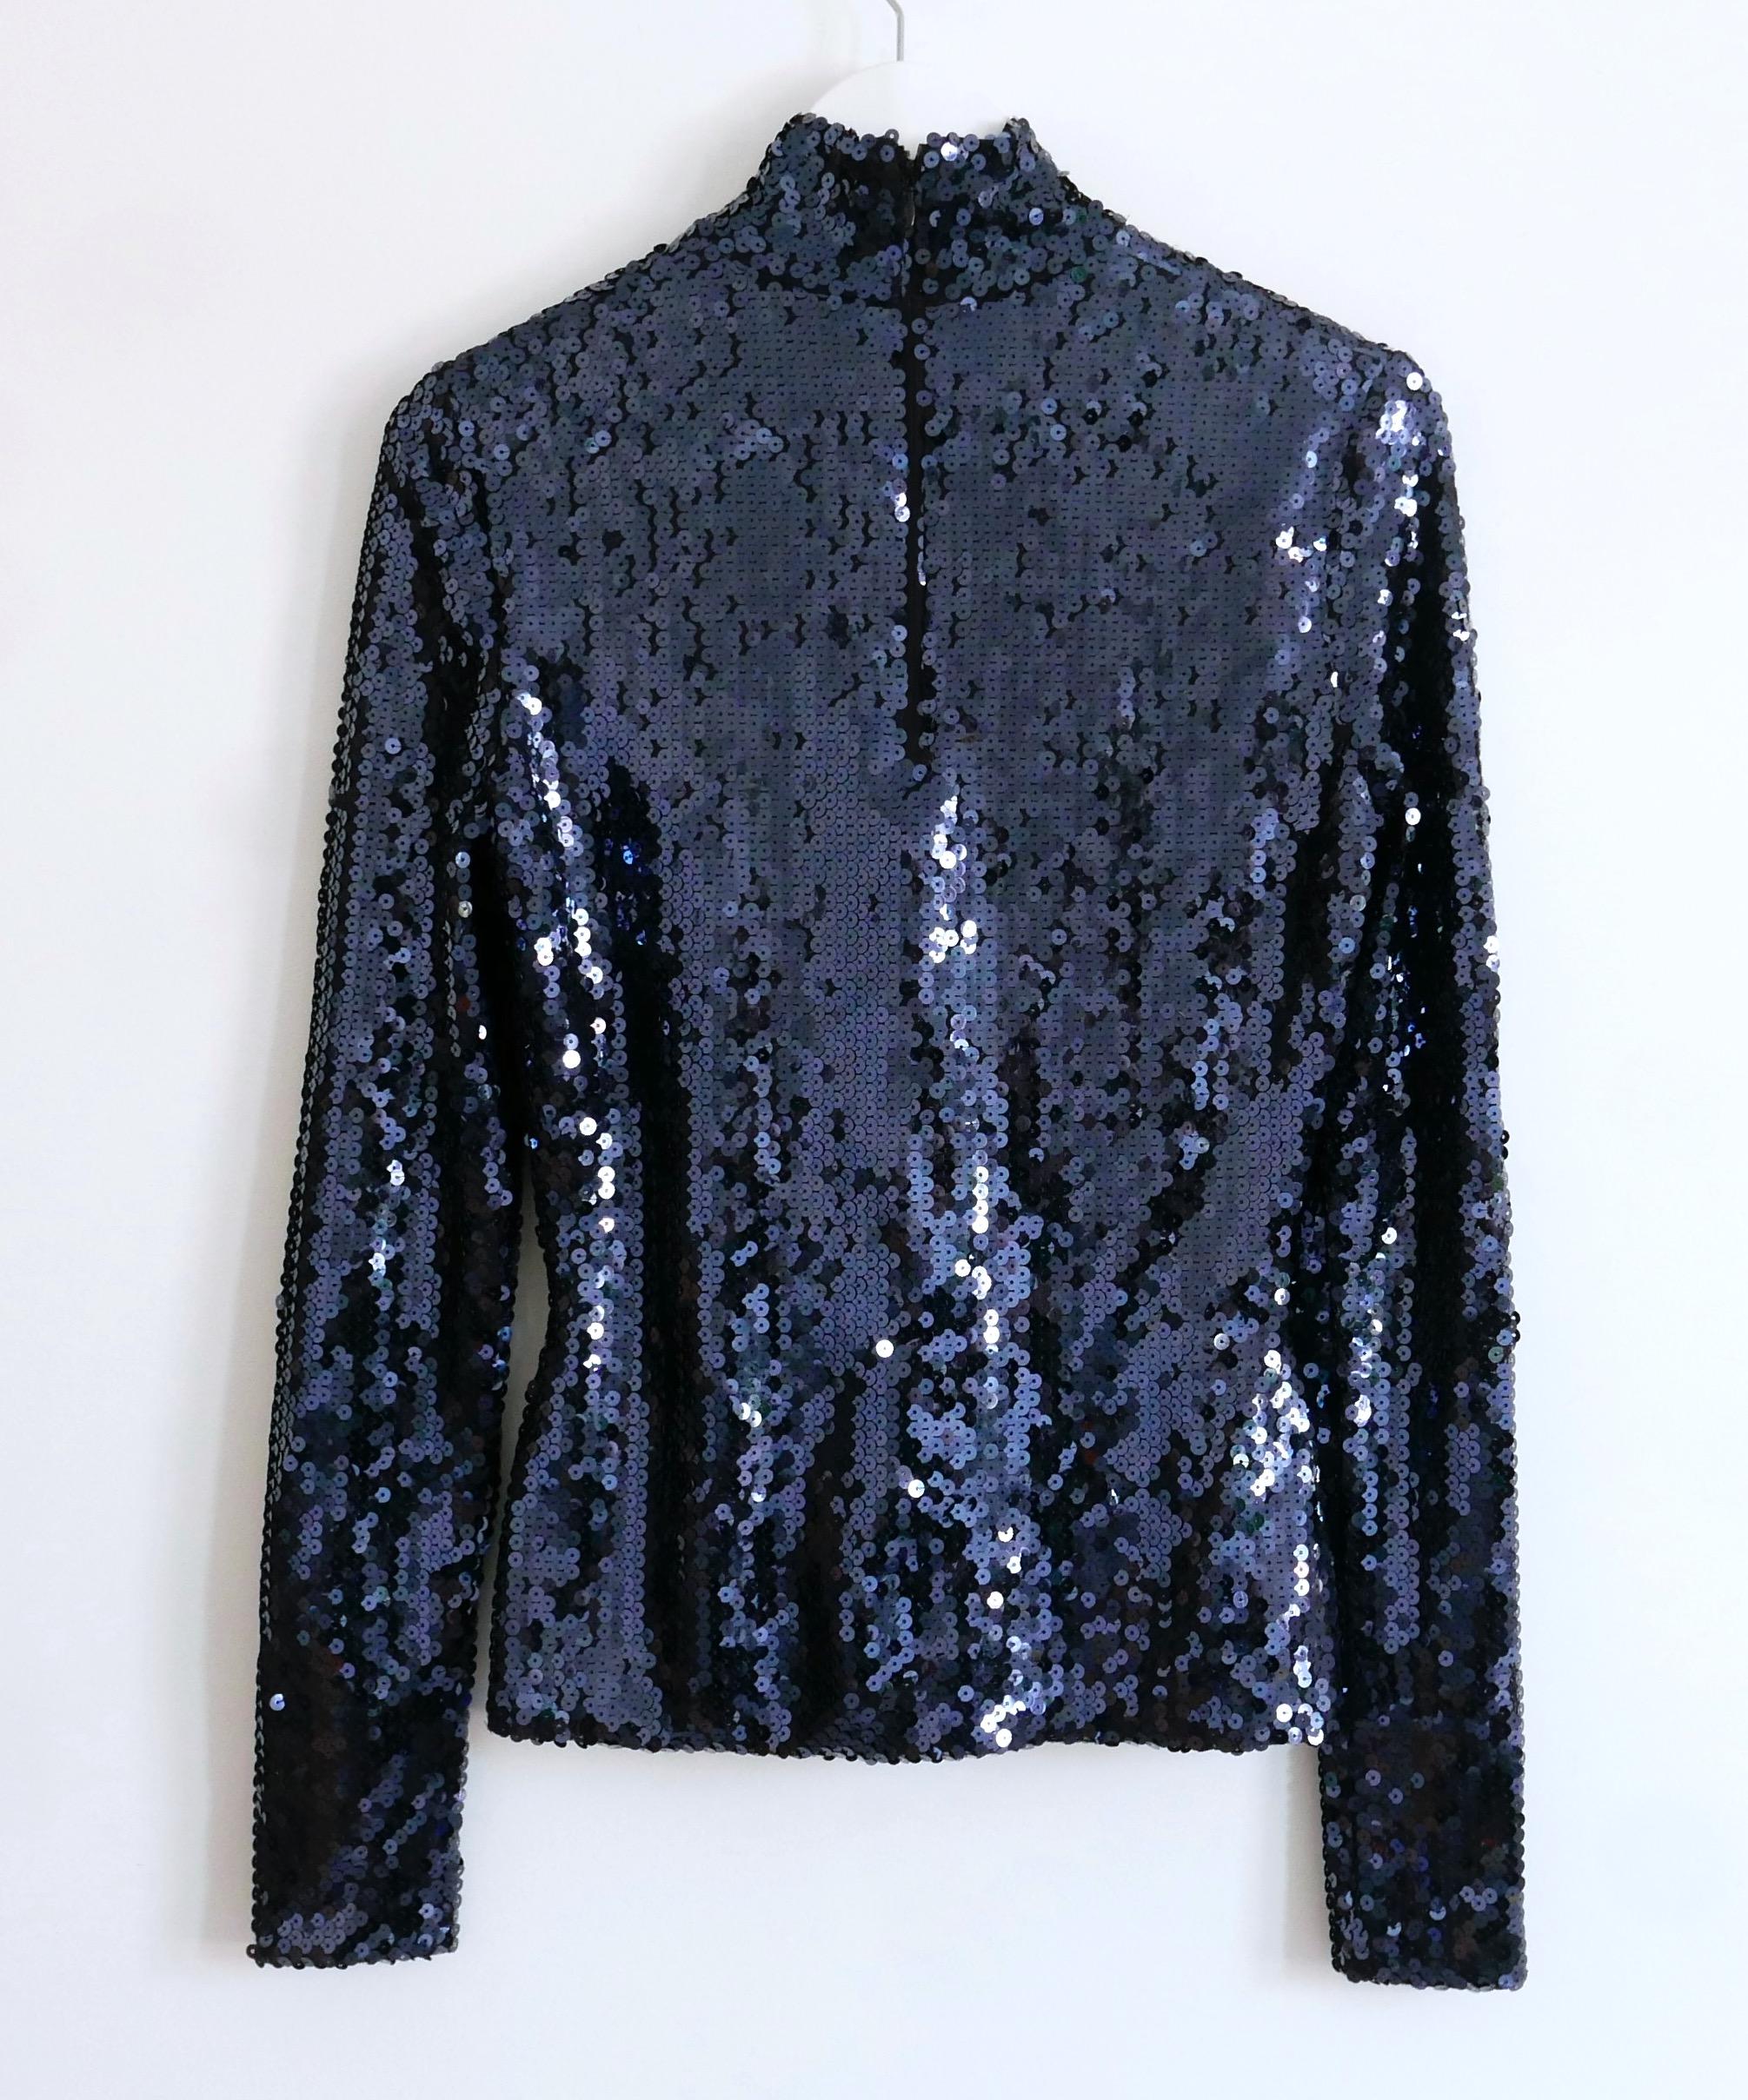 Dior x Raf Simons Pre-Fall 2015 Sequin High Neck Top For Sale 1